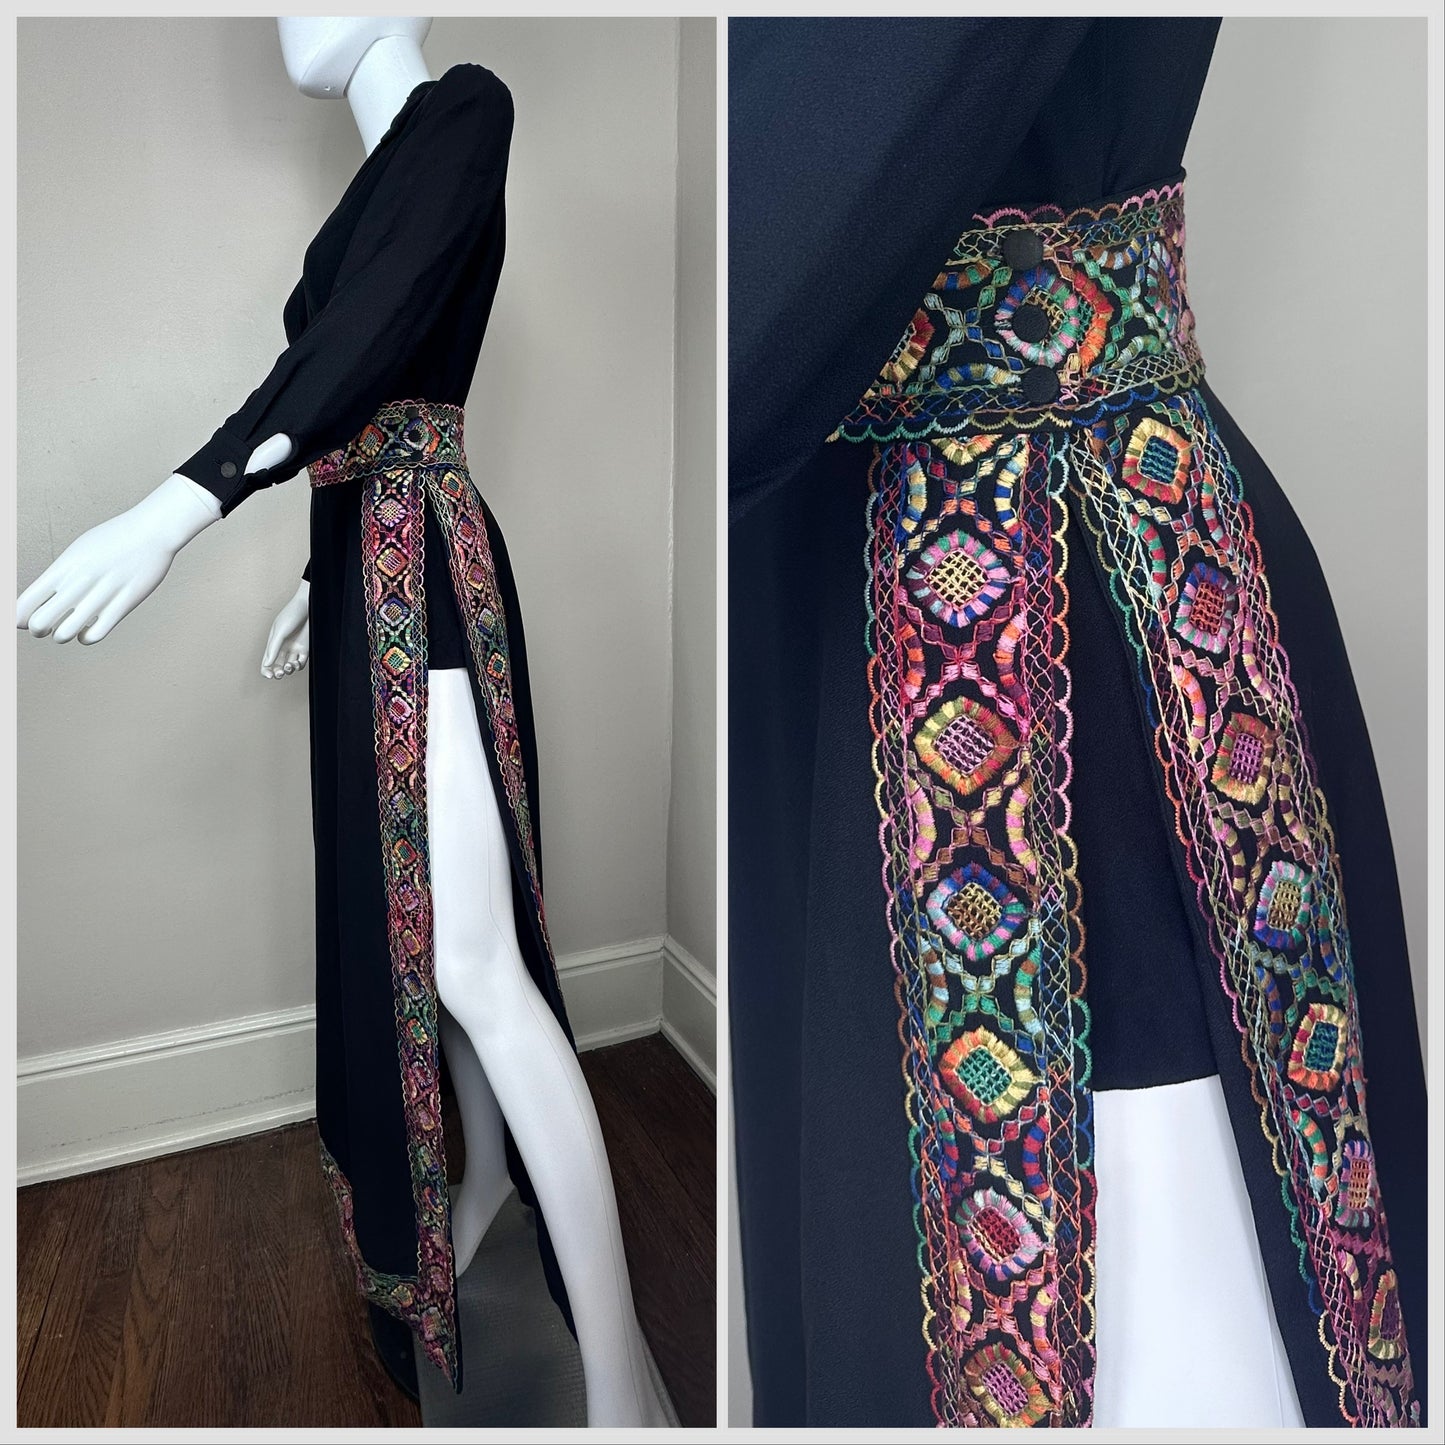 1960s/70s Black Romper with Rainbow Embroidered Skirt, Jack Bryan Designed by Dupuis Size XS-Small